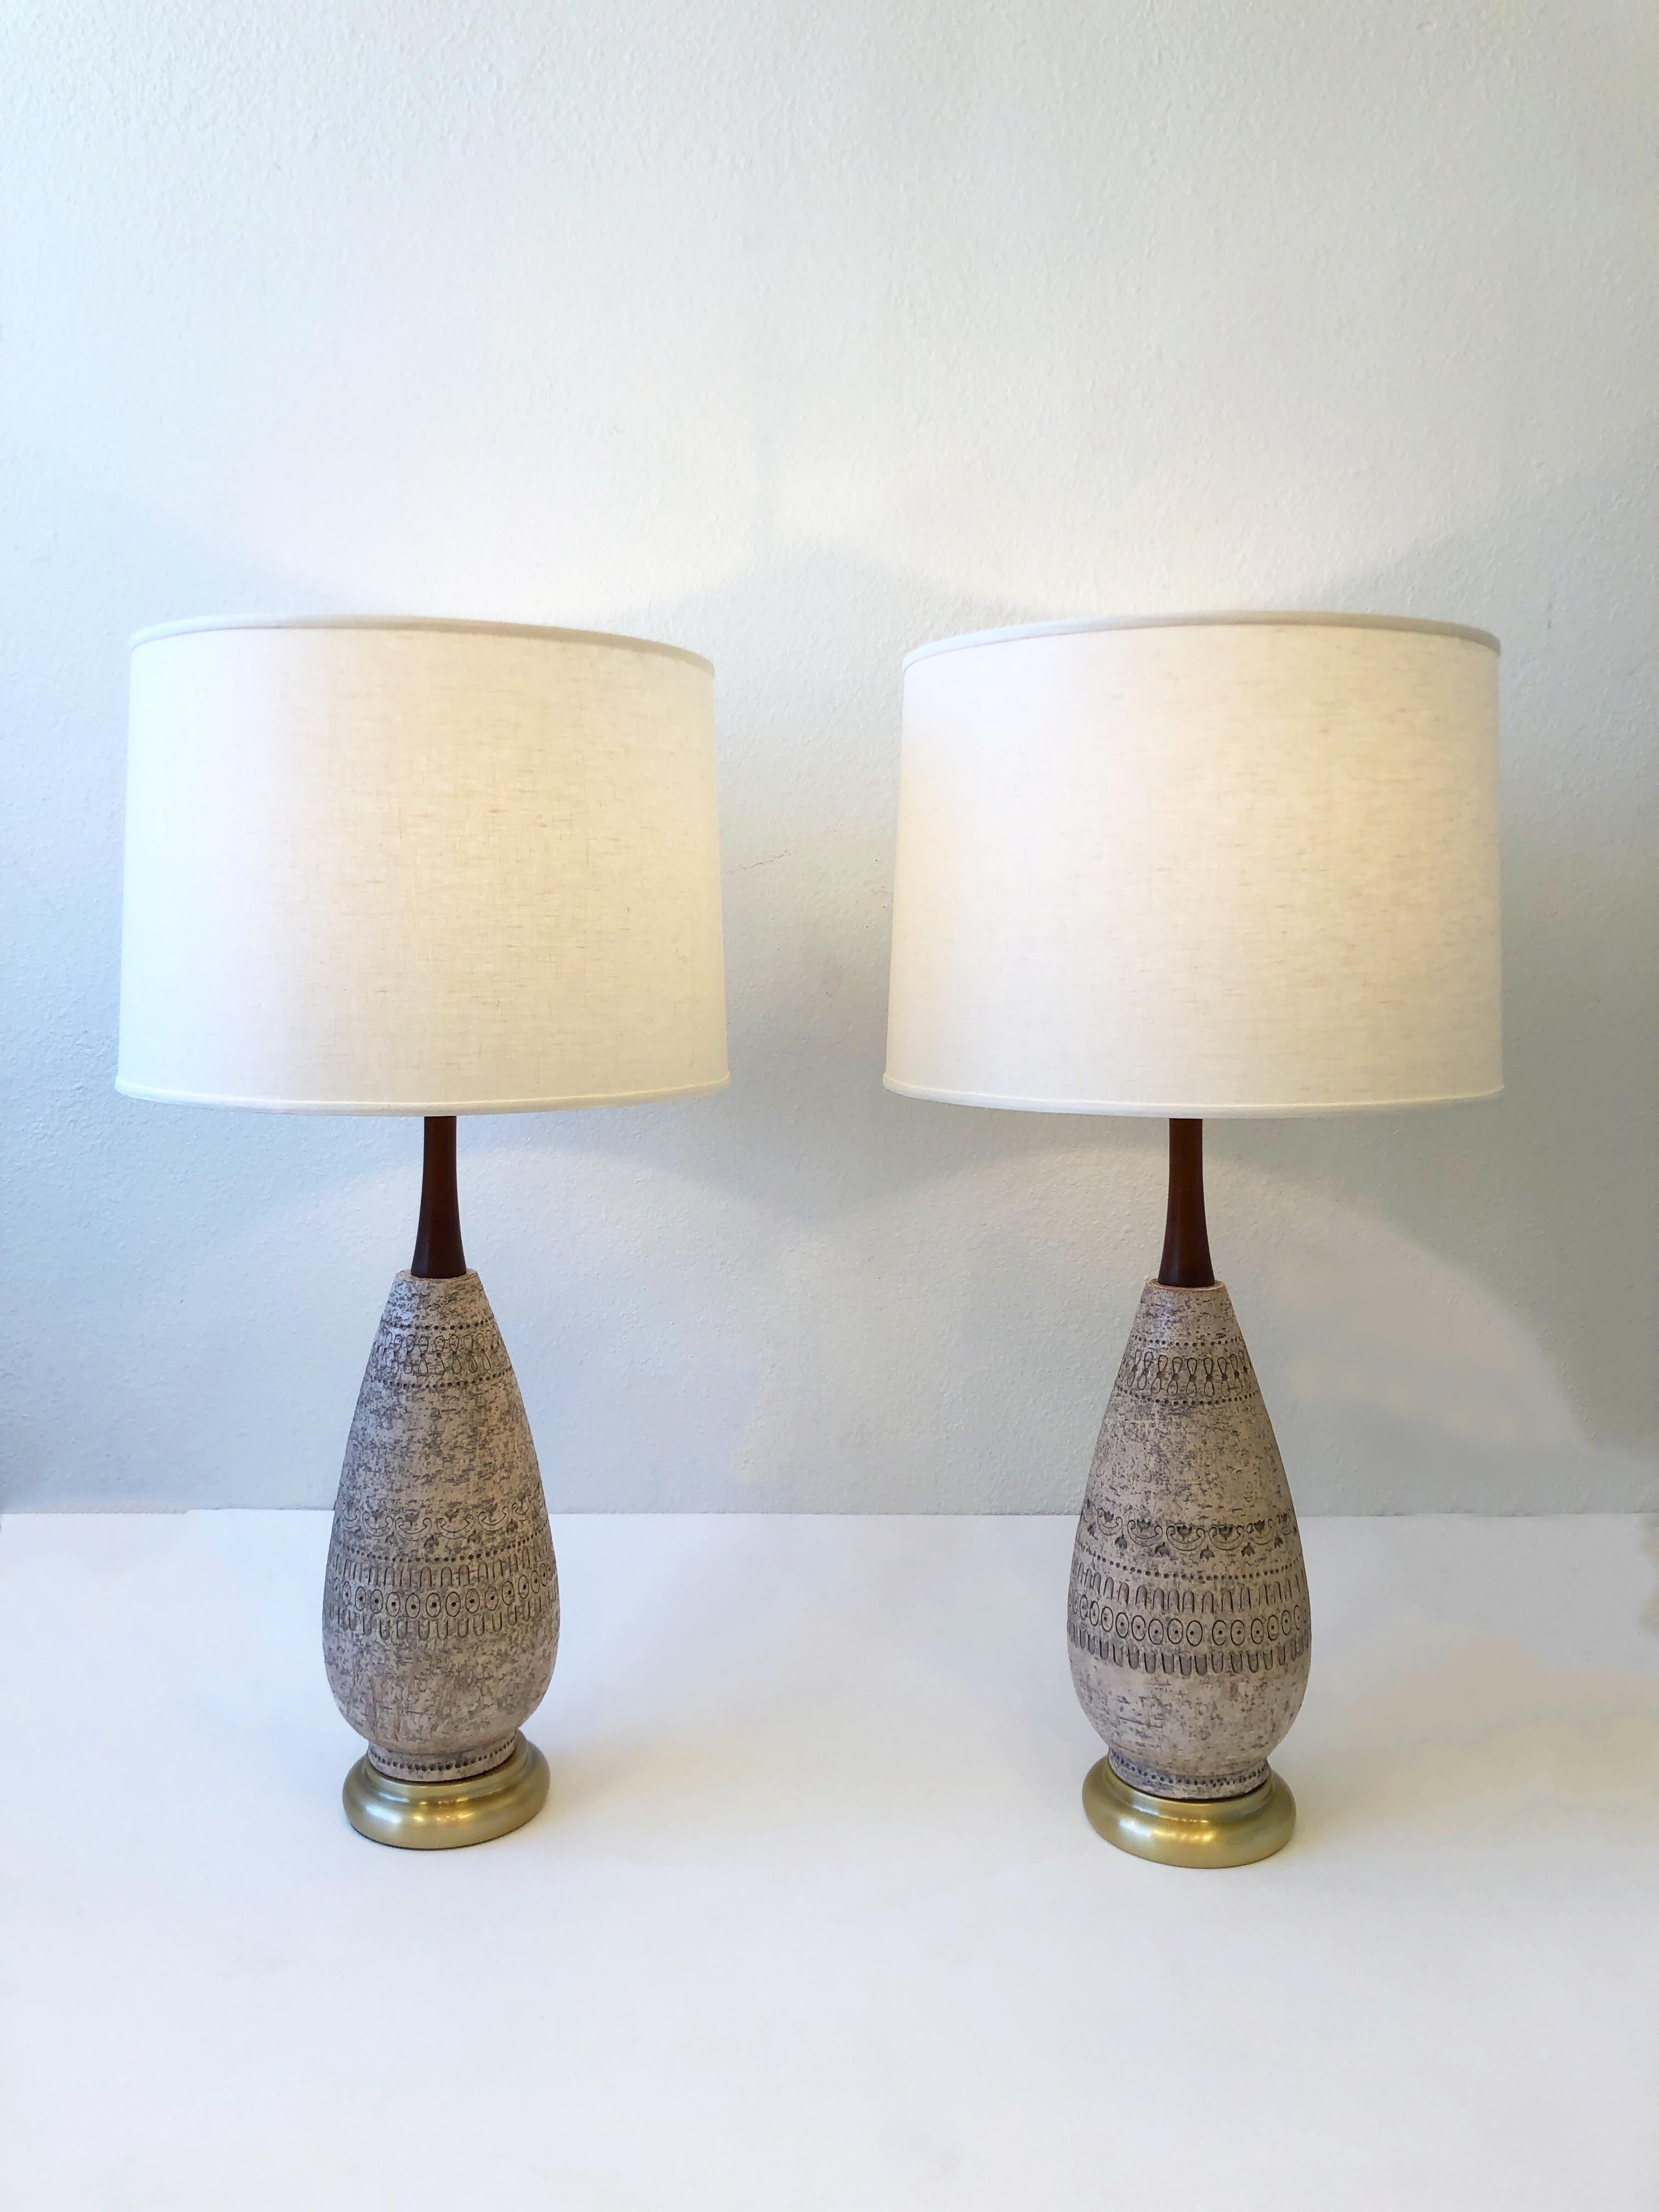 Italian Ceramic and Brass Pair of Table Lamps by Bitossi 1